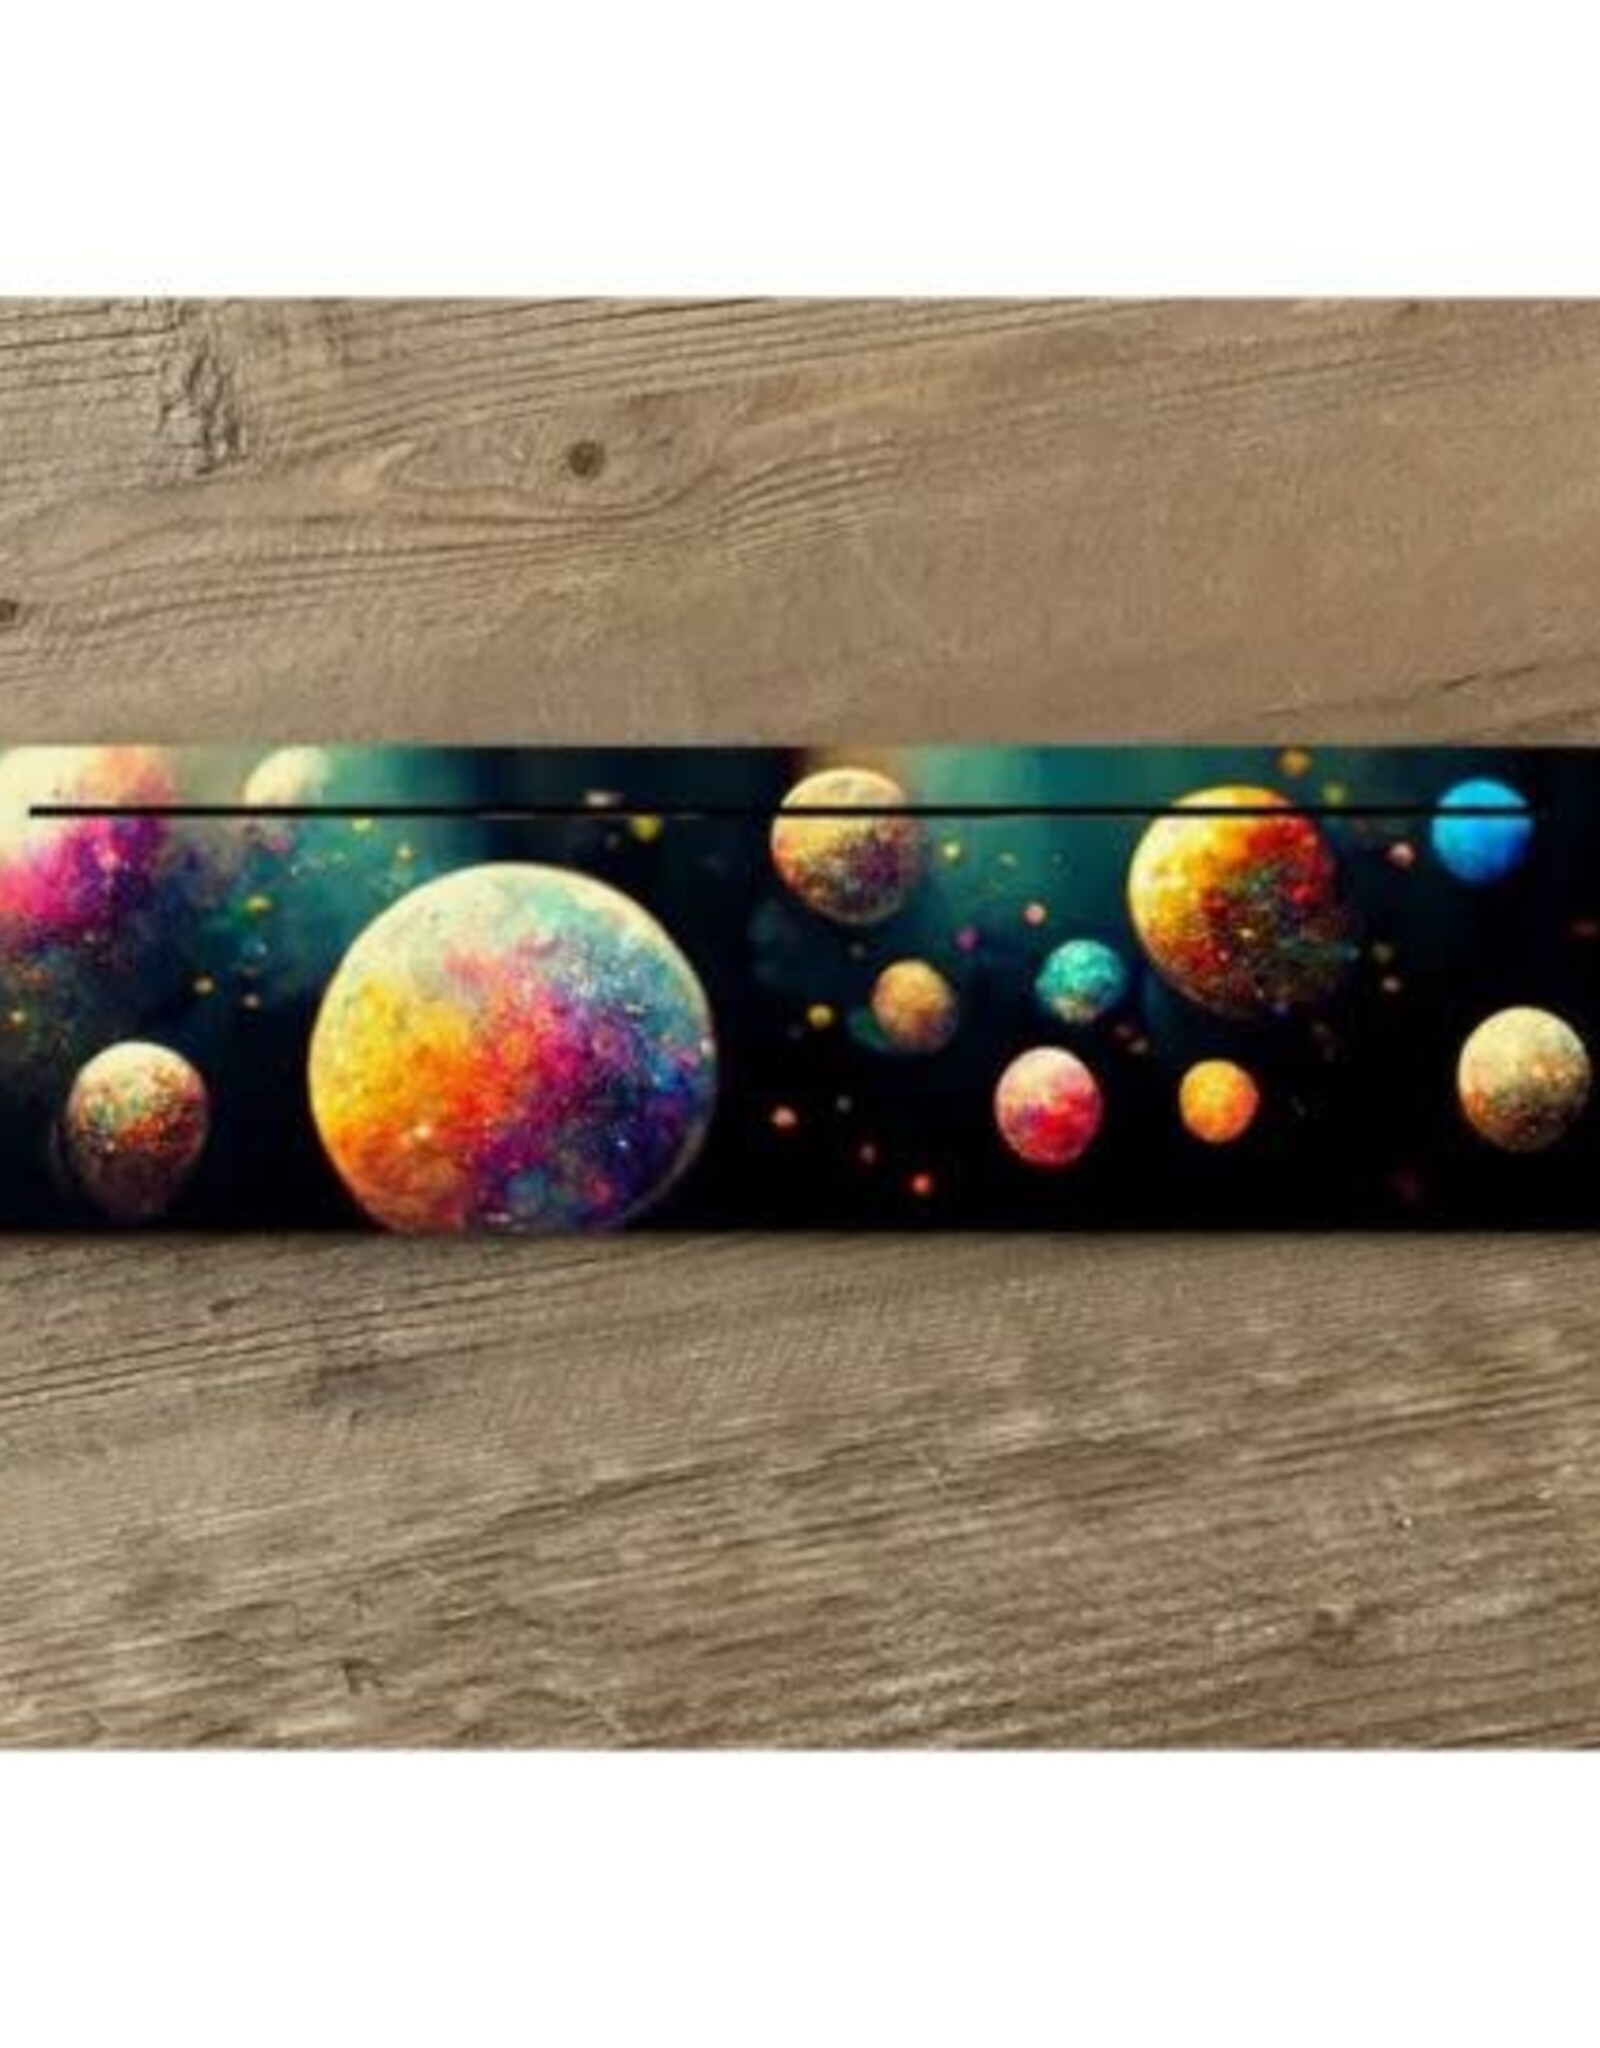 Wood Card Holder - Planets